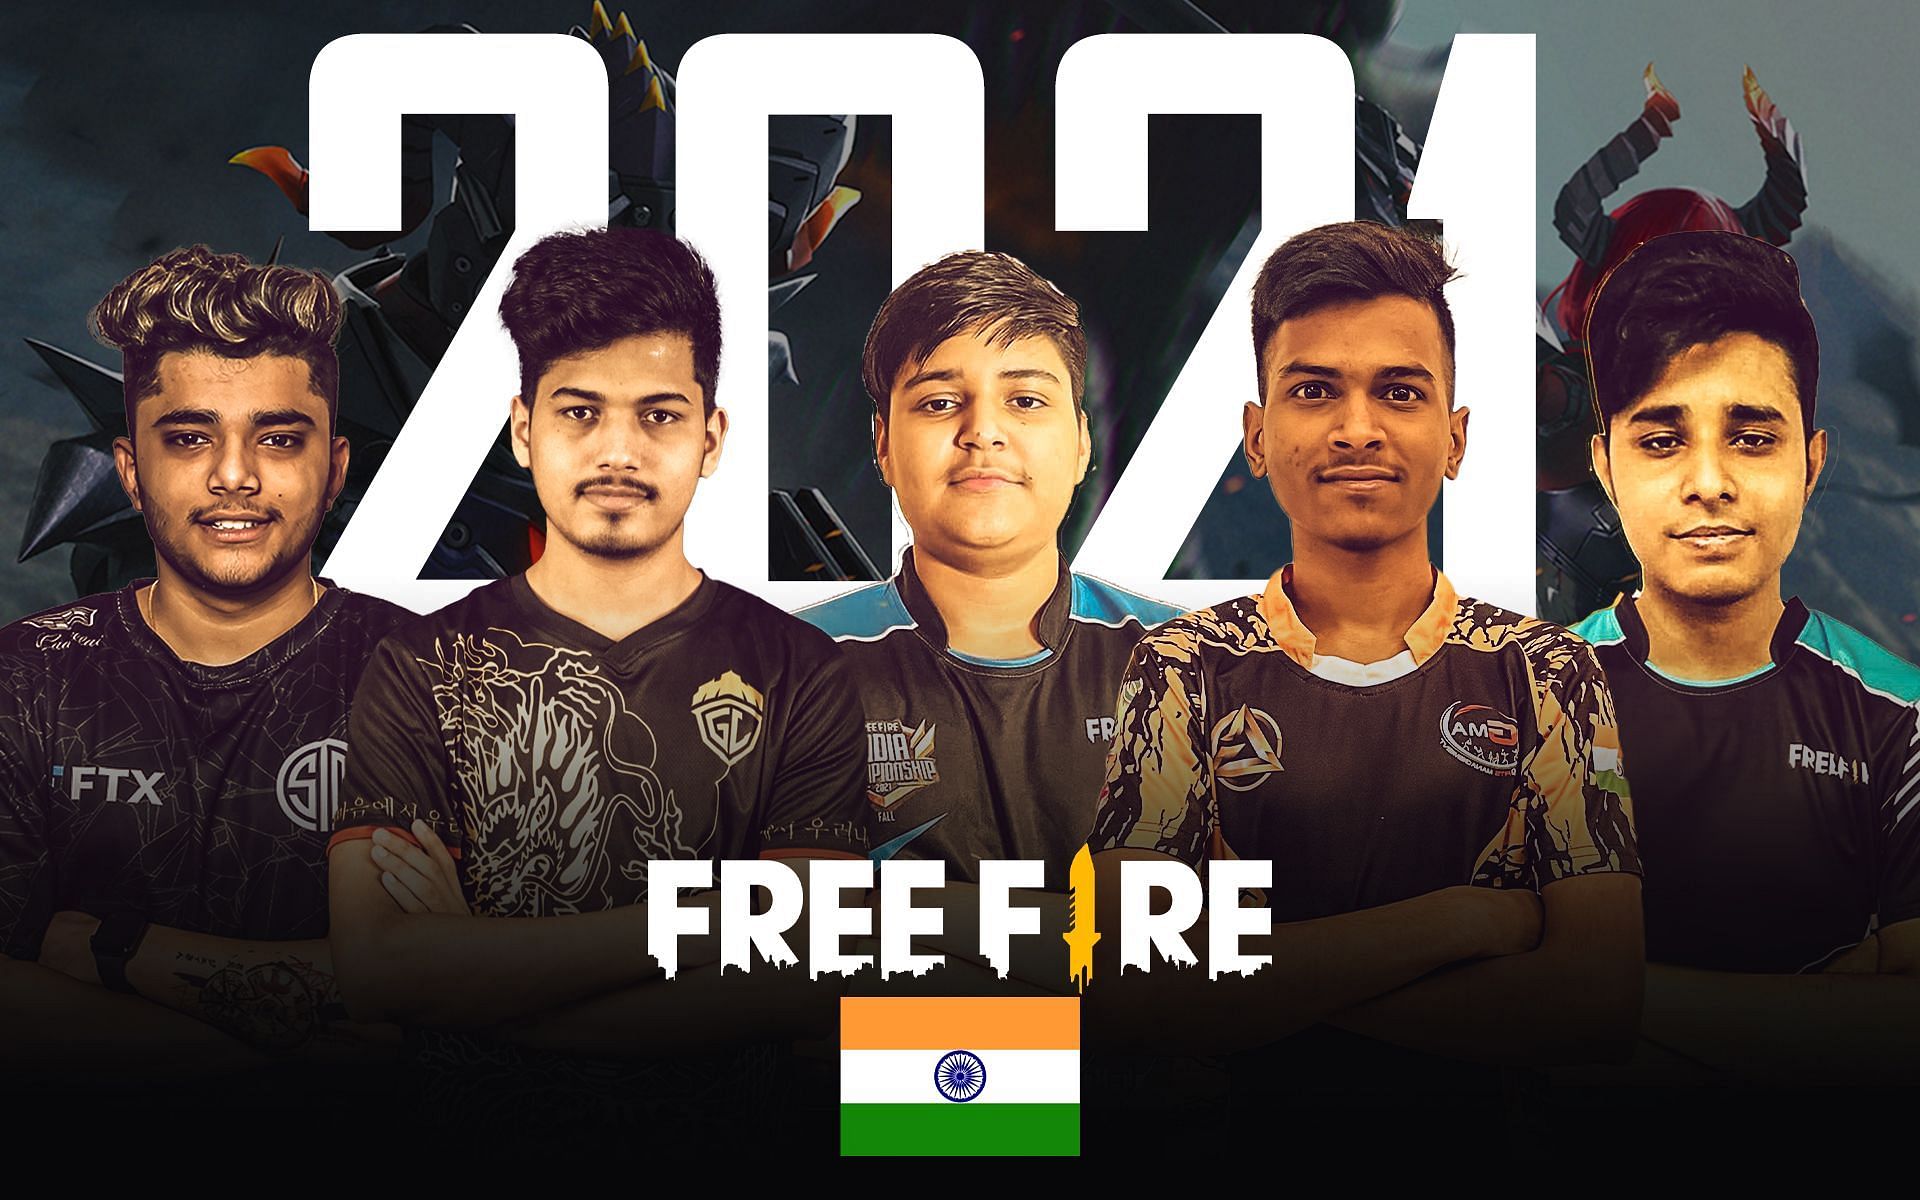 Top 5 Free Fire Esports players from india in 2021